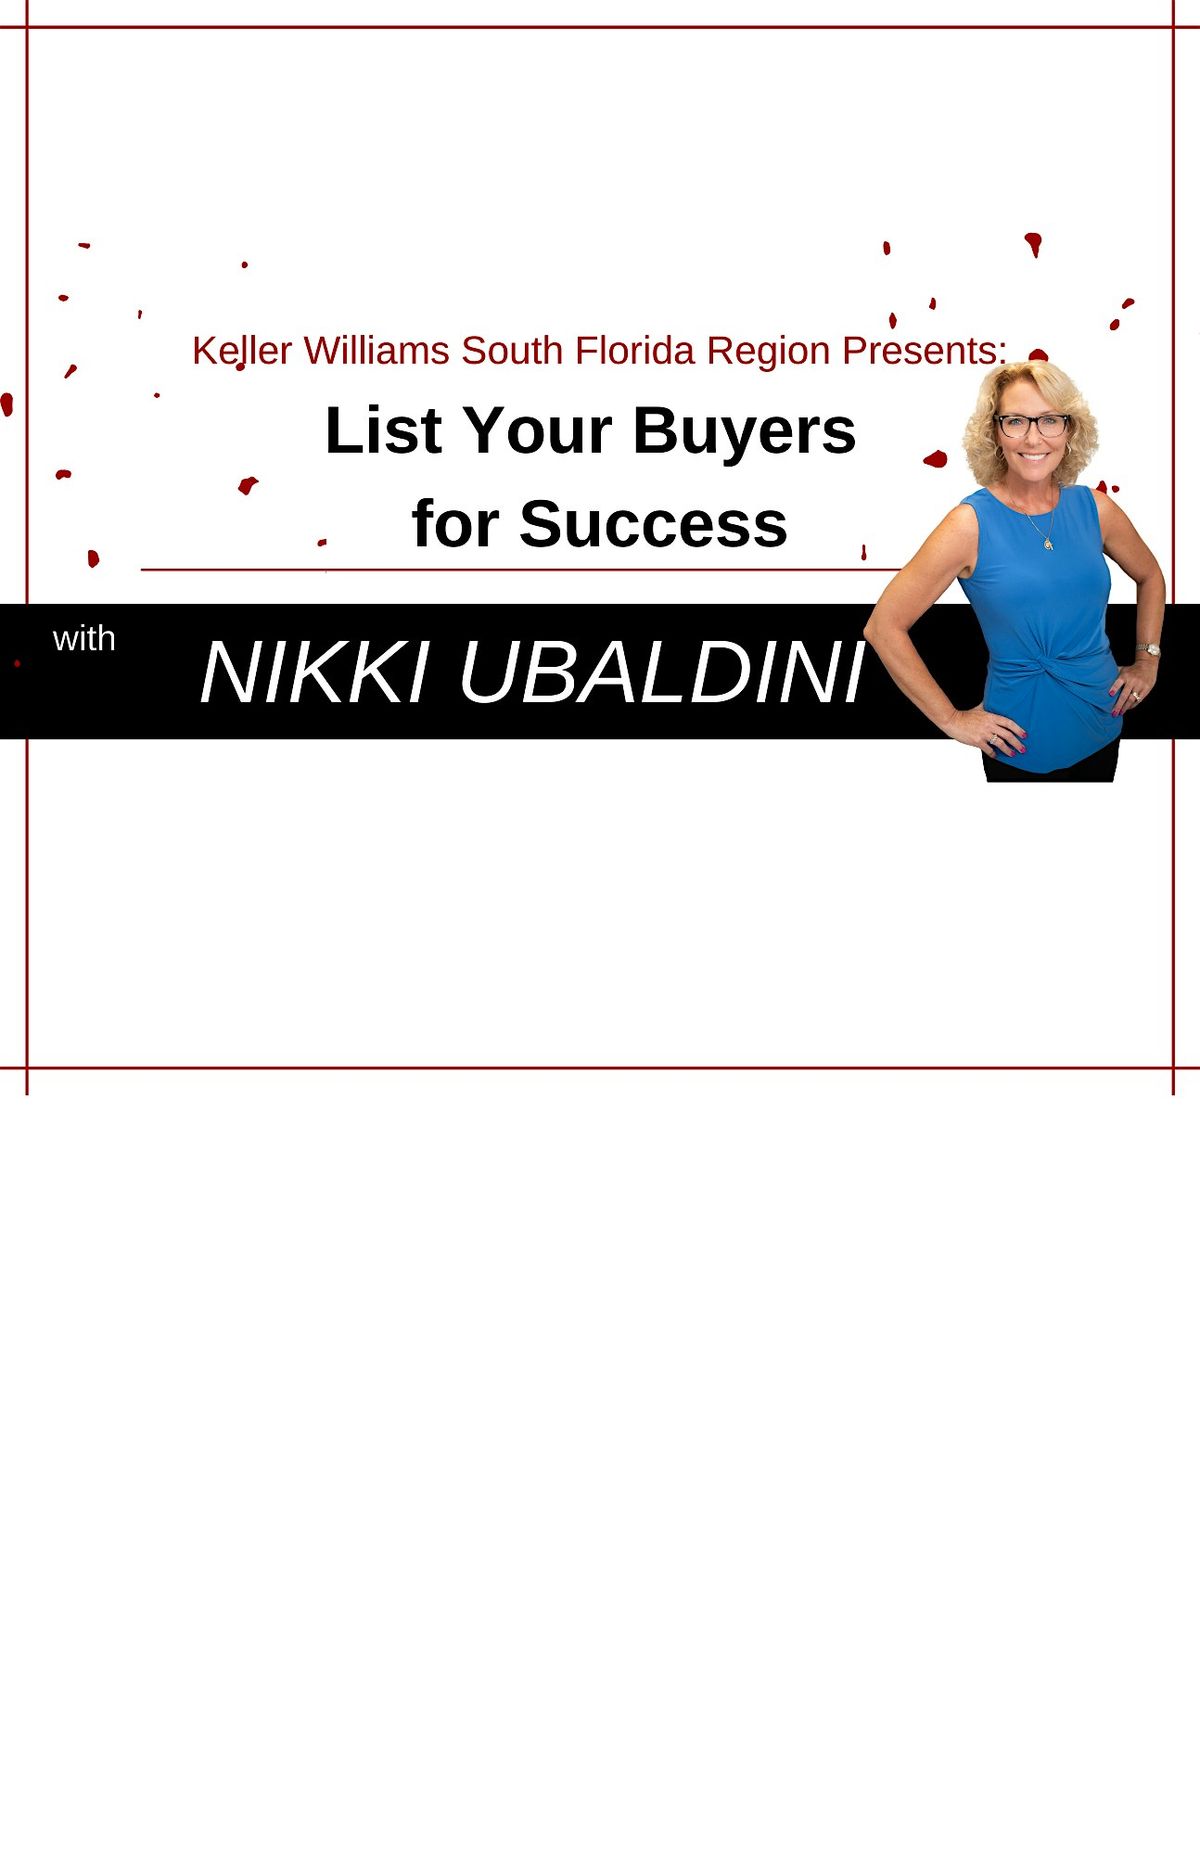 FREE List Your Buyers For Success with Nikki Ubaldini in Melbourne